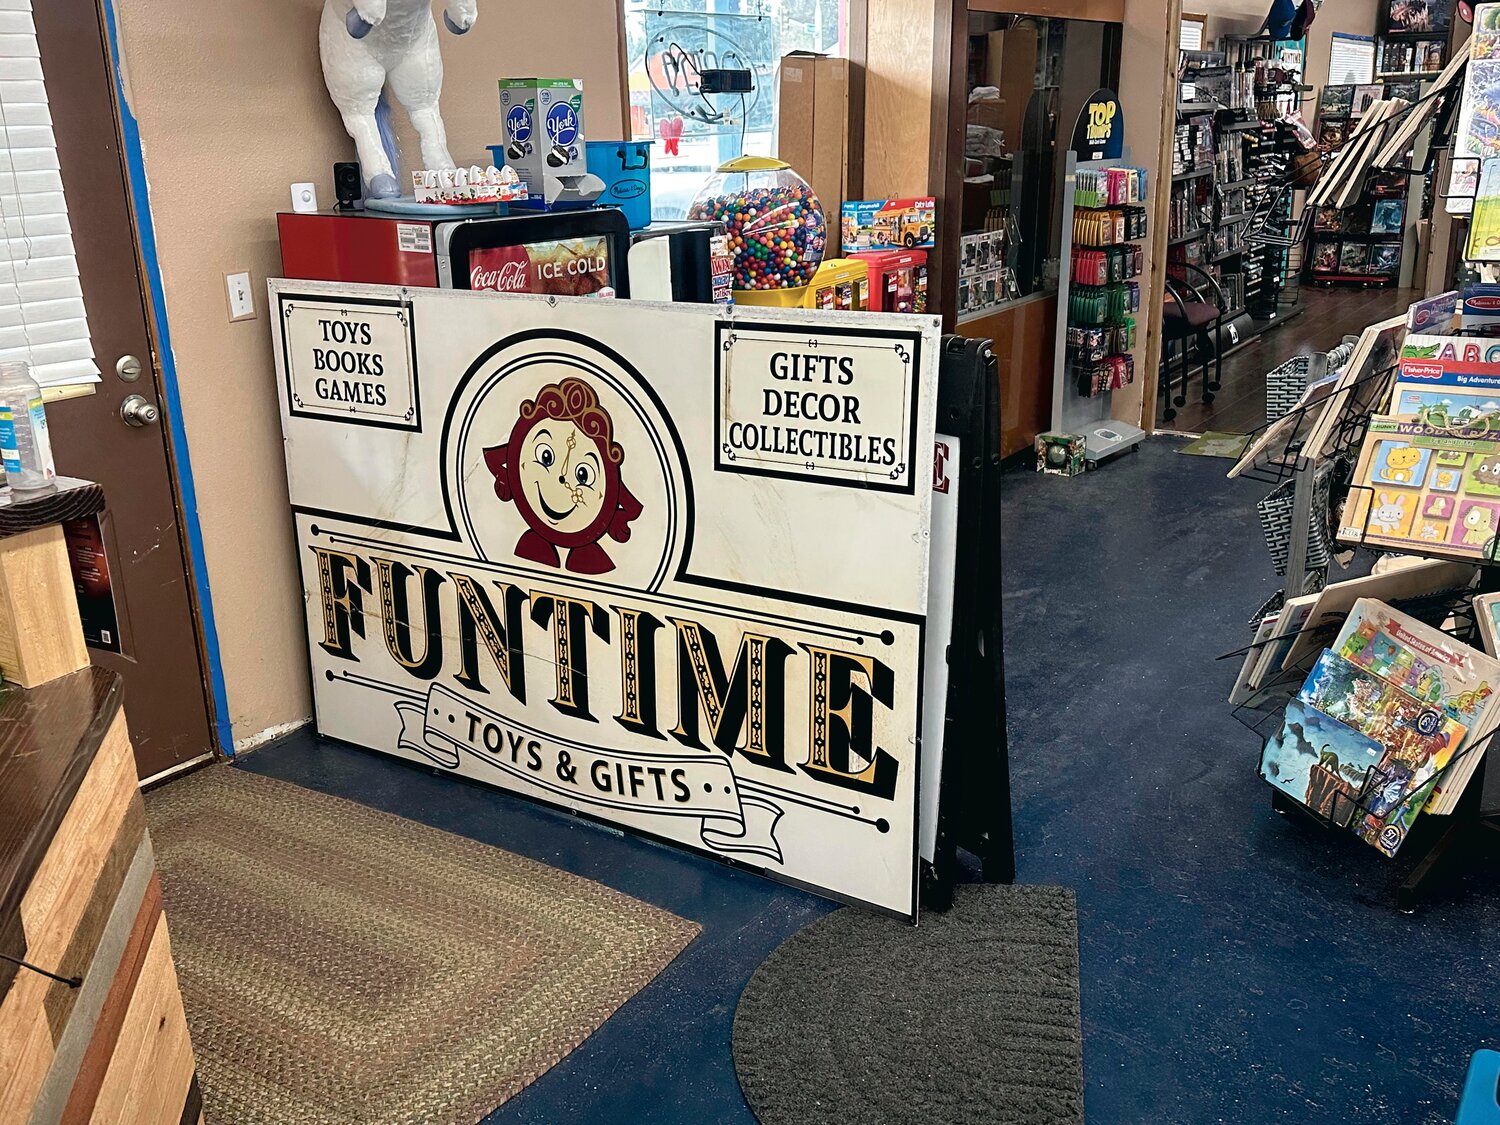 Funtime Toys is located at 303 First St. S. in Yelm, across from Yelm City Park.